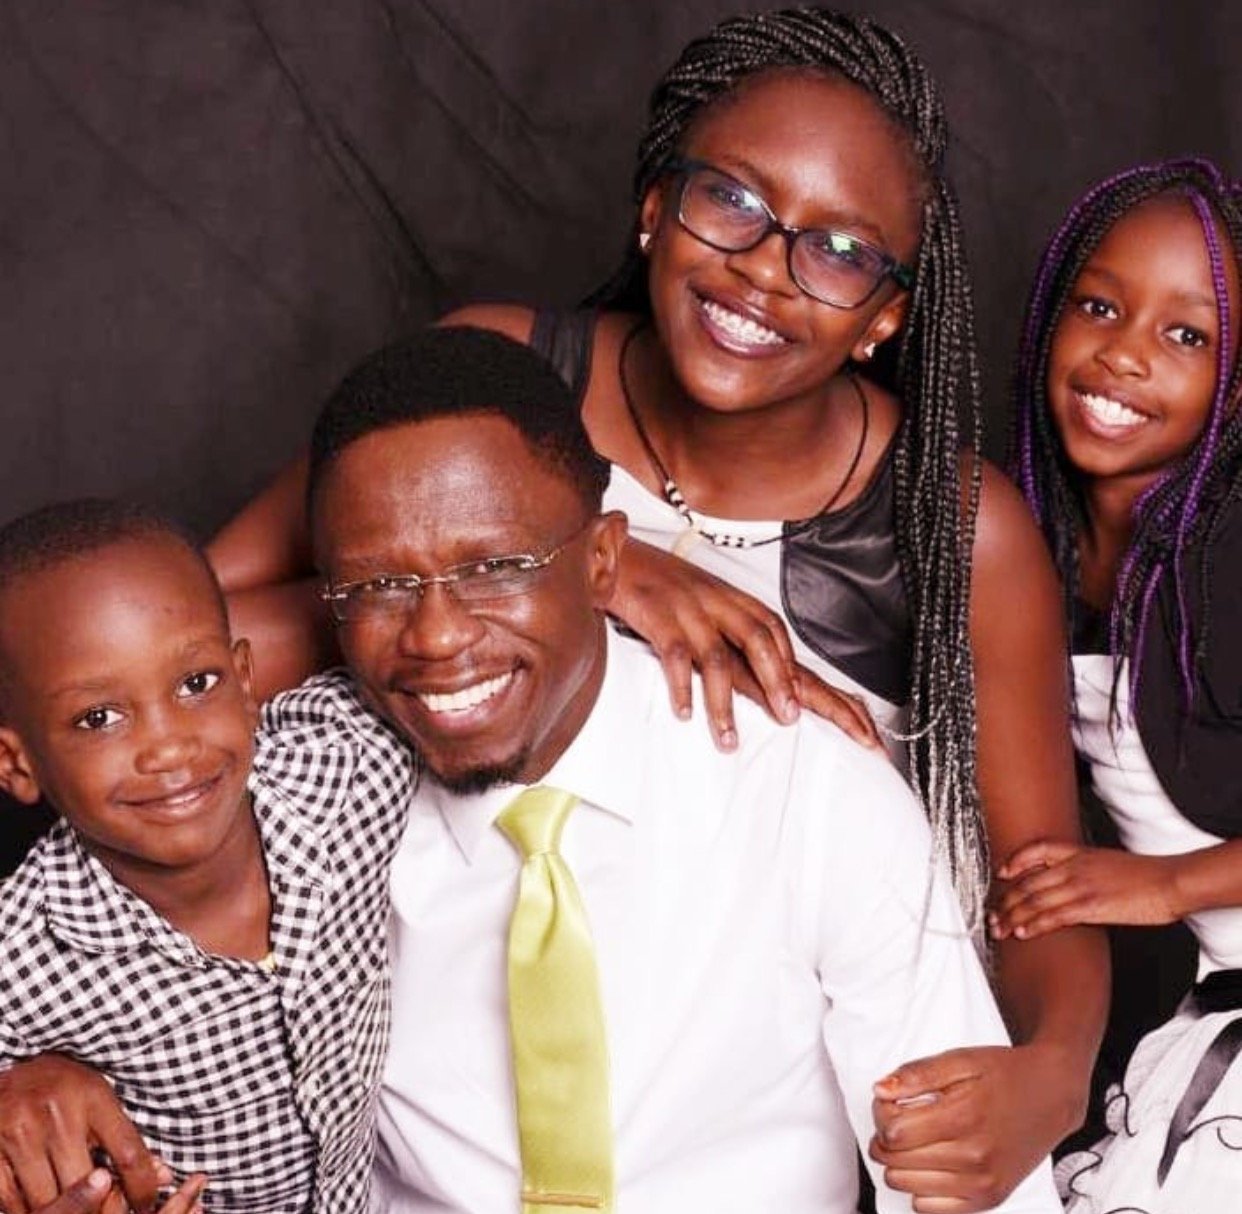 Daddy goals! Adorable photos of Ababu Namwamba spending quality time with his kids